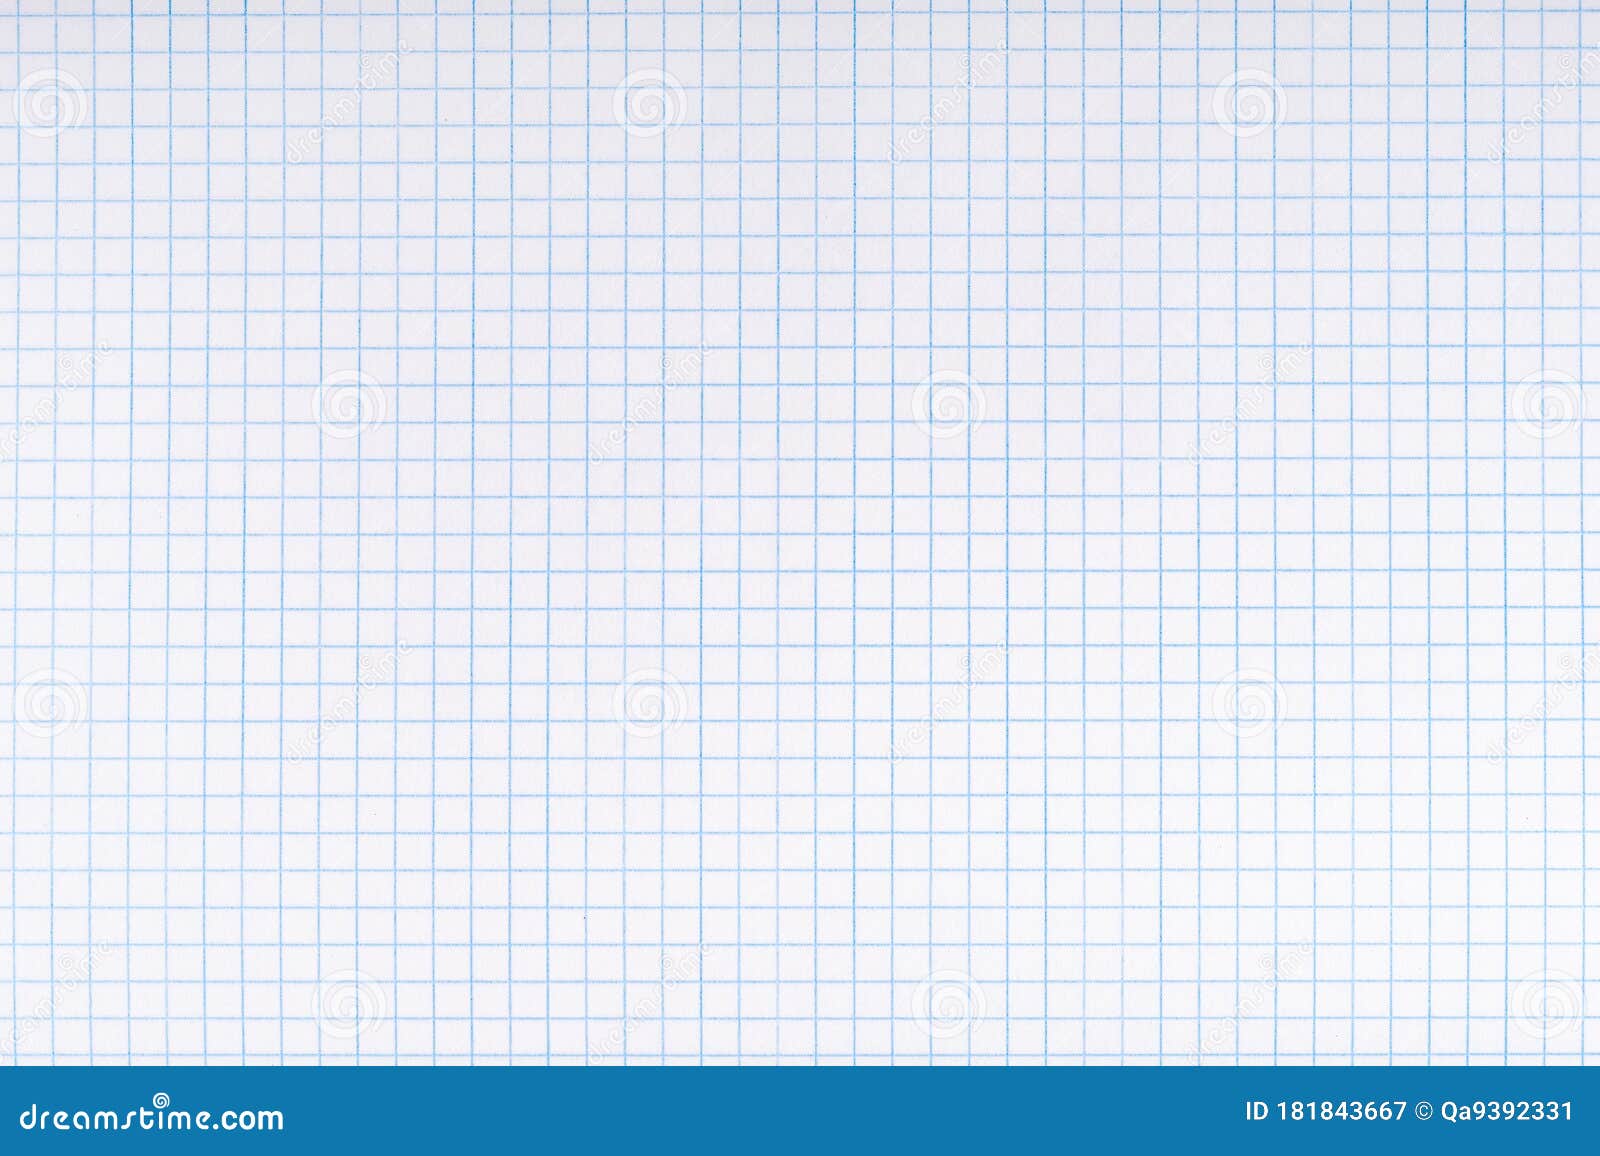 Blank Math Worksheet Template from thumbs.dreamstime.com